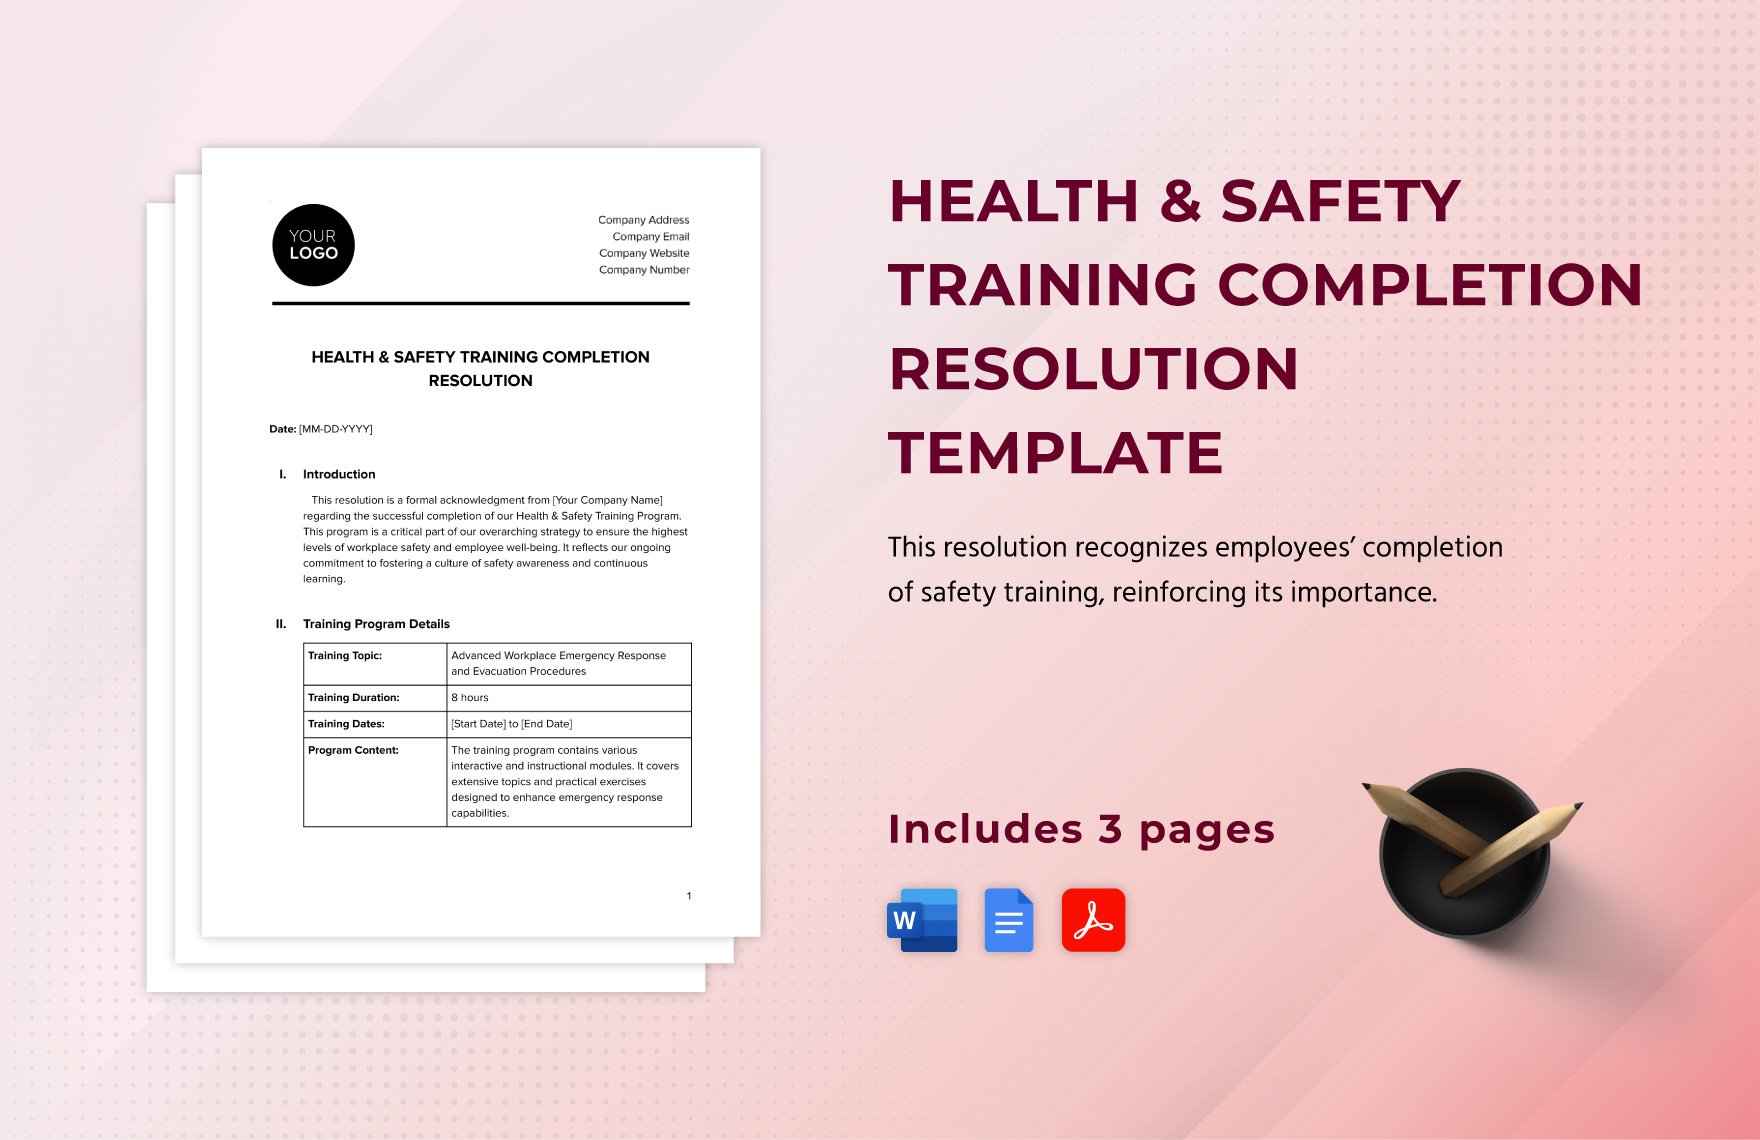 Health & Safety Training Completion Resolution Template